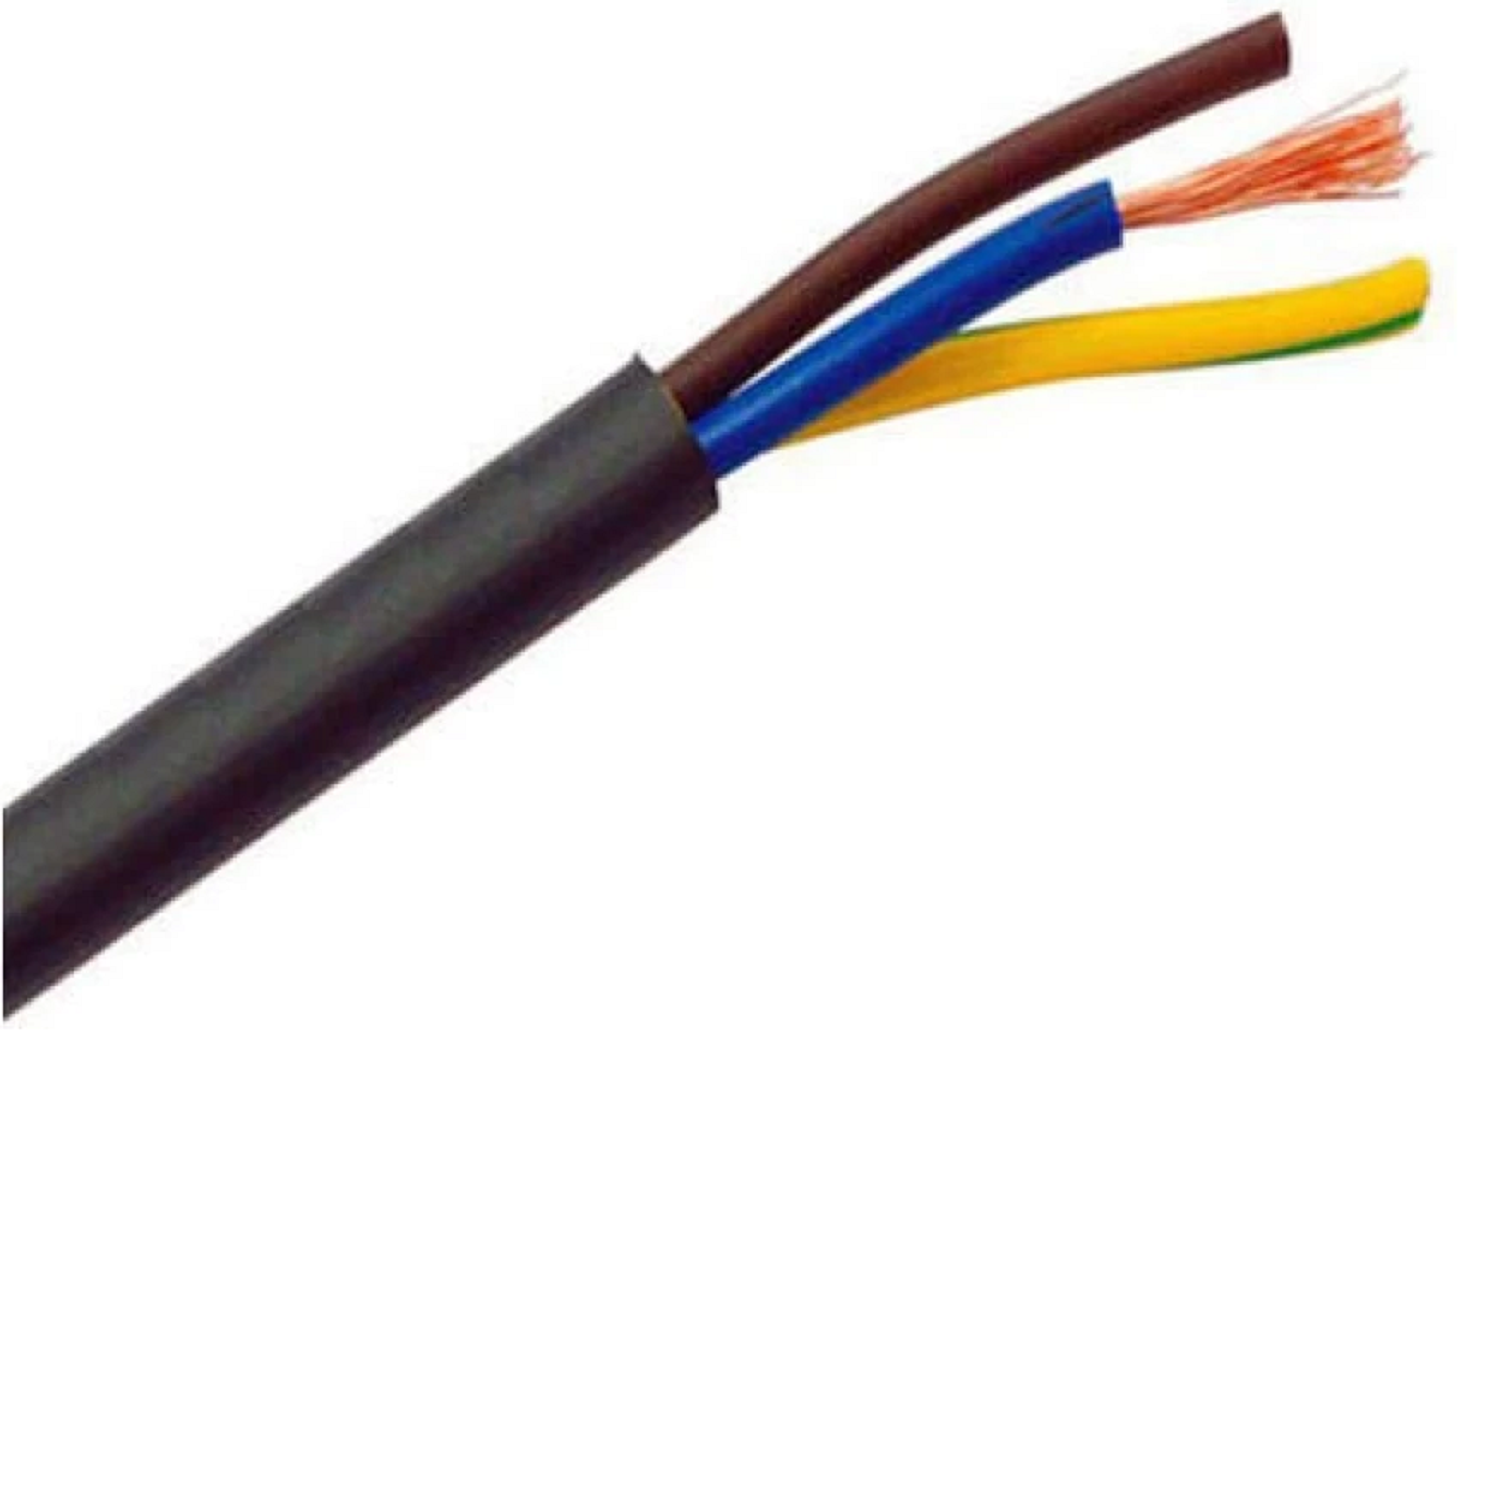 1.0 Sqmm Finolex Copper Flexible Cable With PVC Insulated For Domestic 38 Industrial Uses